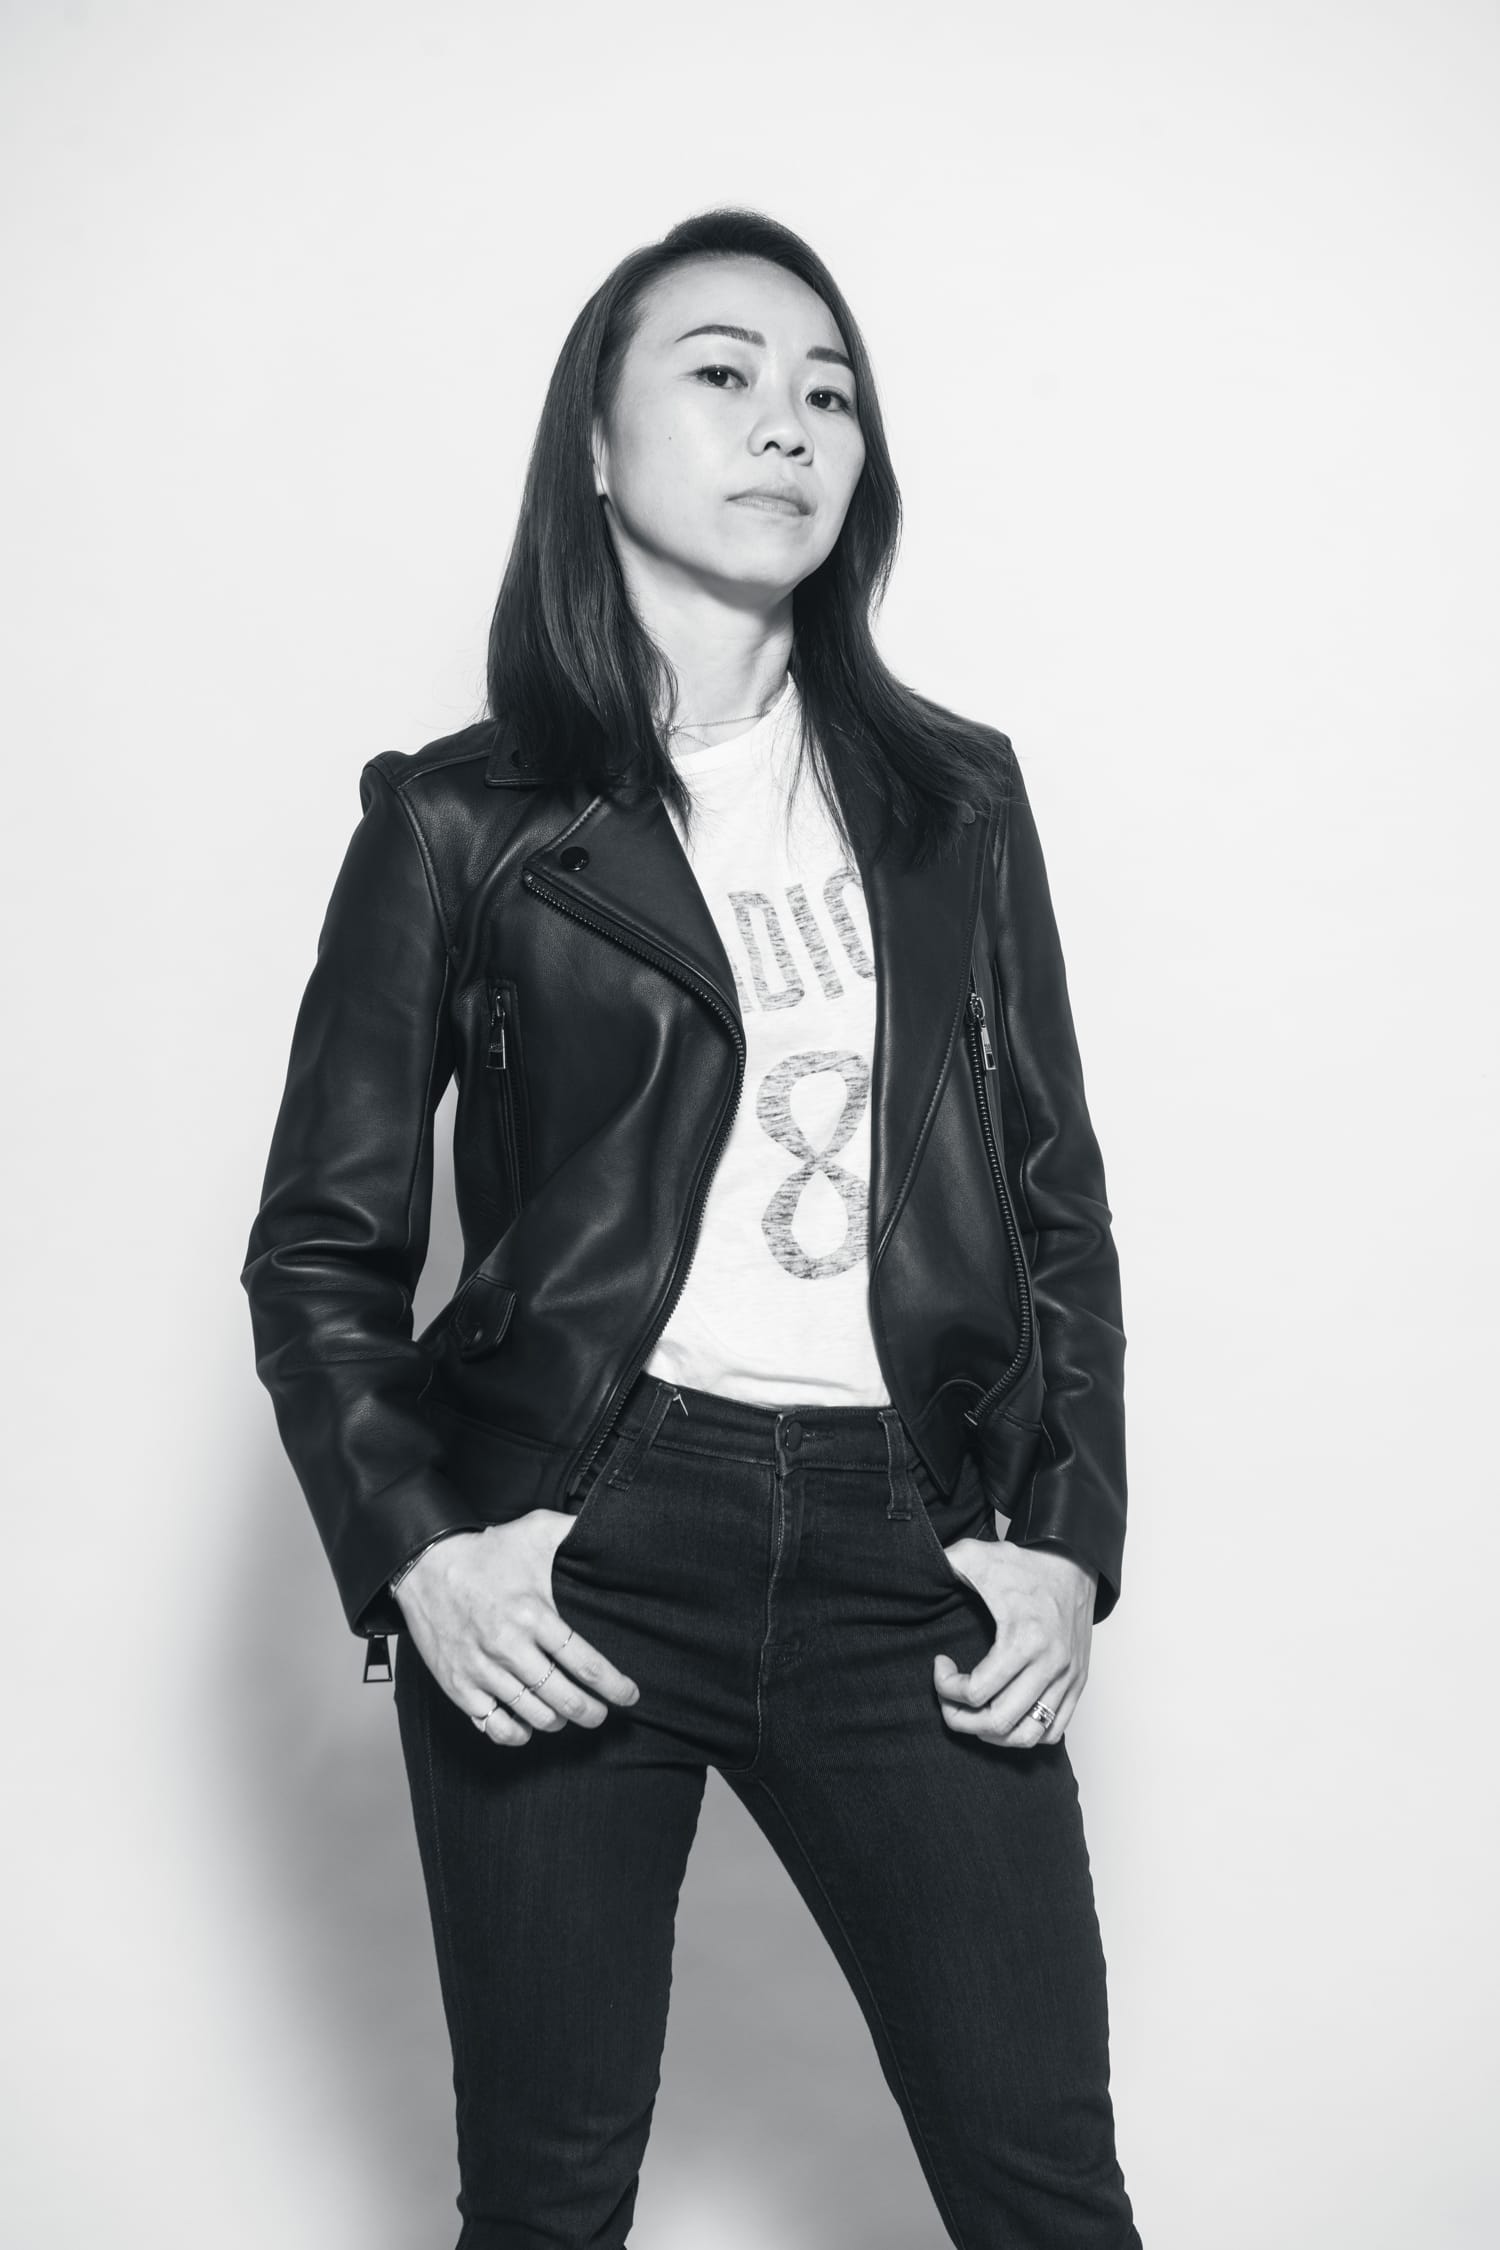 Black and white photo of a woman posing for her photo, Wearing a black leather jacket and black jeans during a professional branding photoshoot in Singapore Credit: White Room Studio